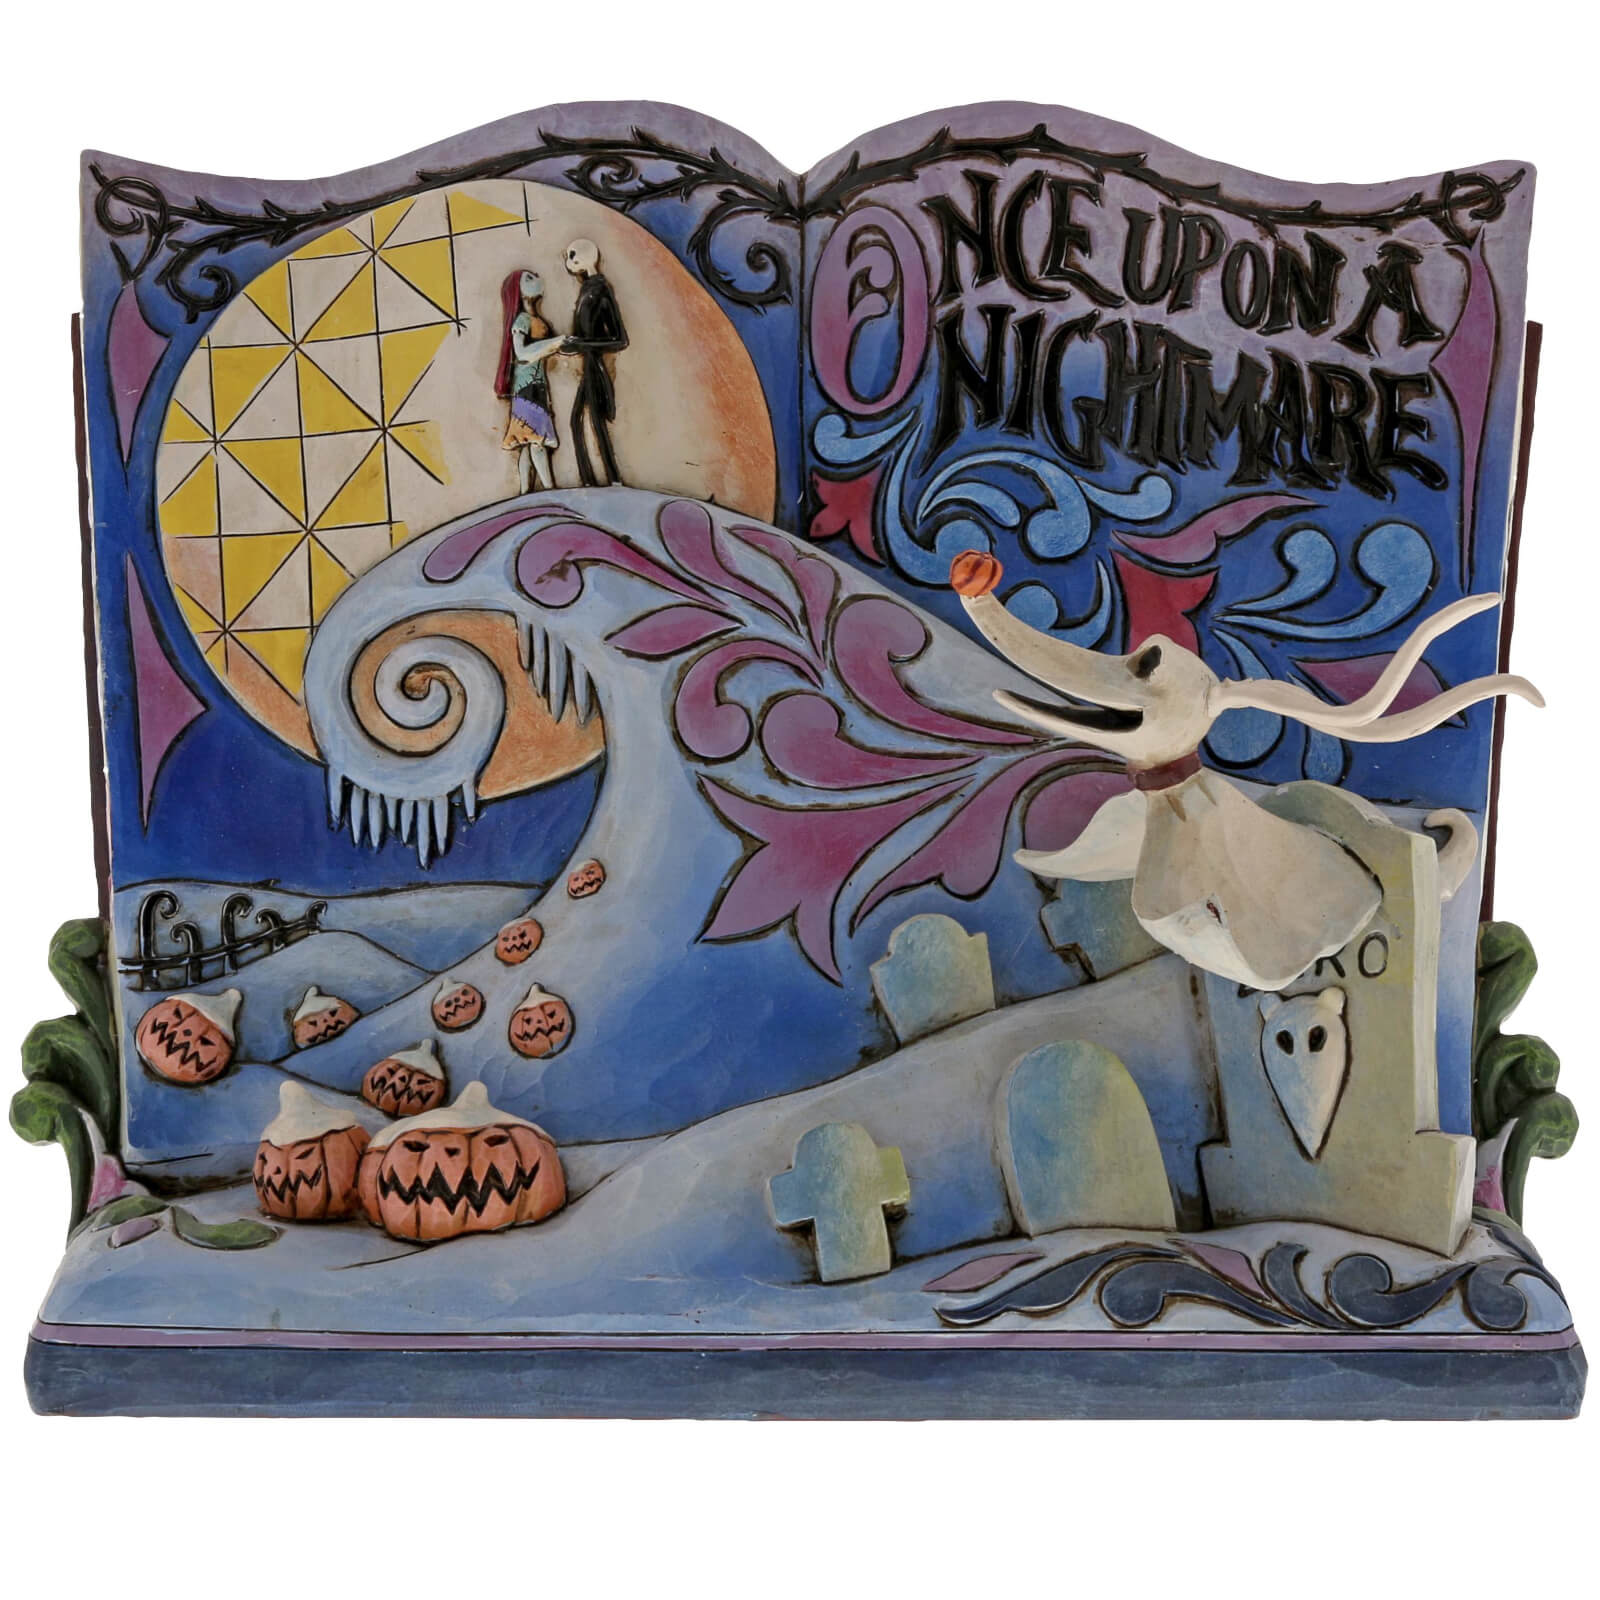 Enesco Disney Traditions Once Upon a Nightmare Storybook